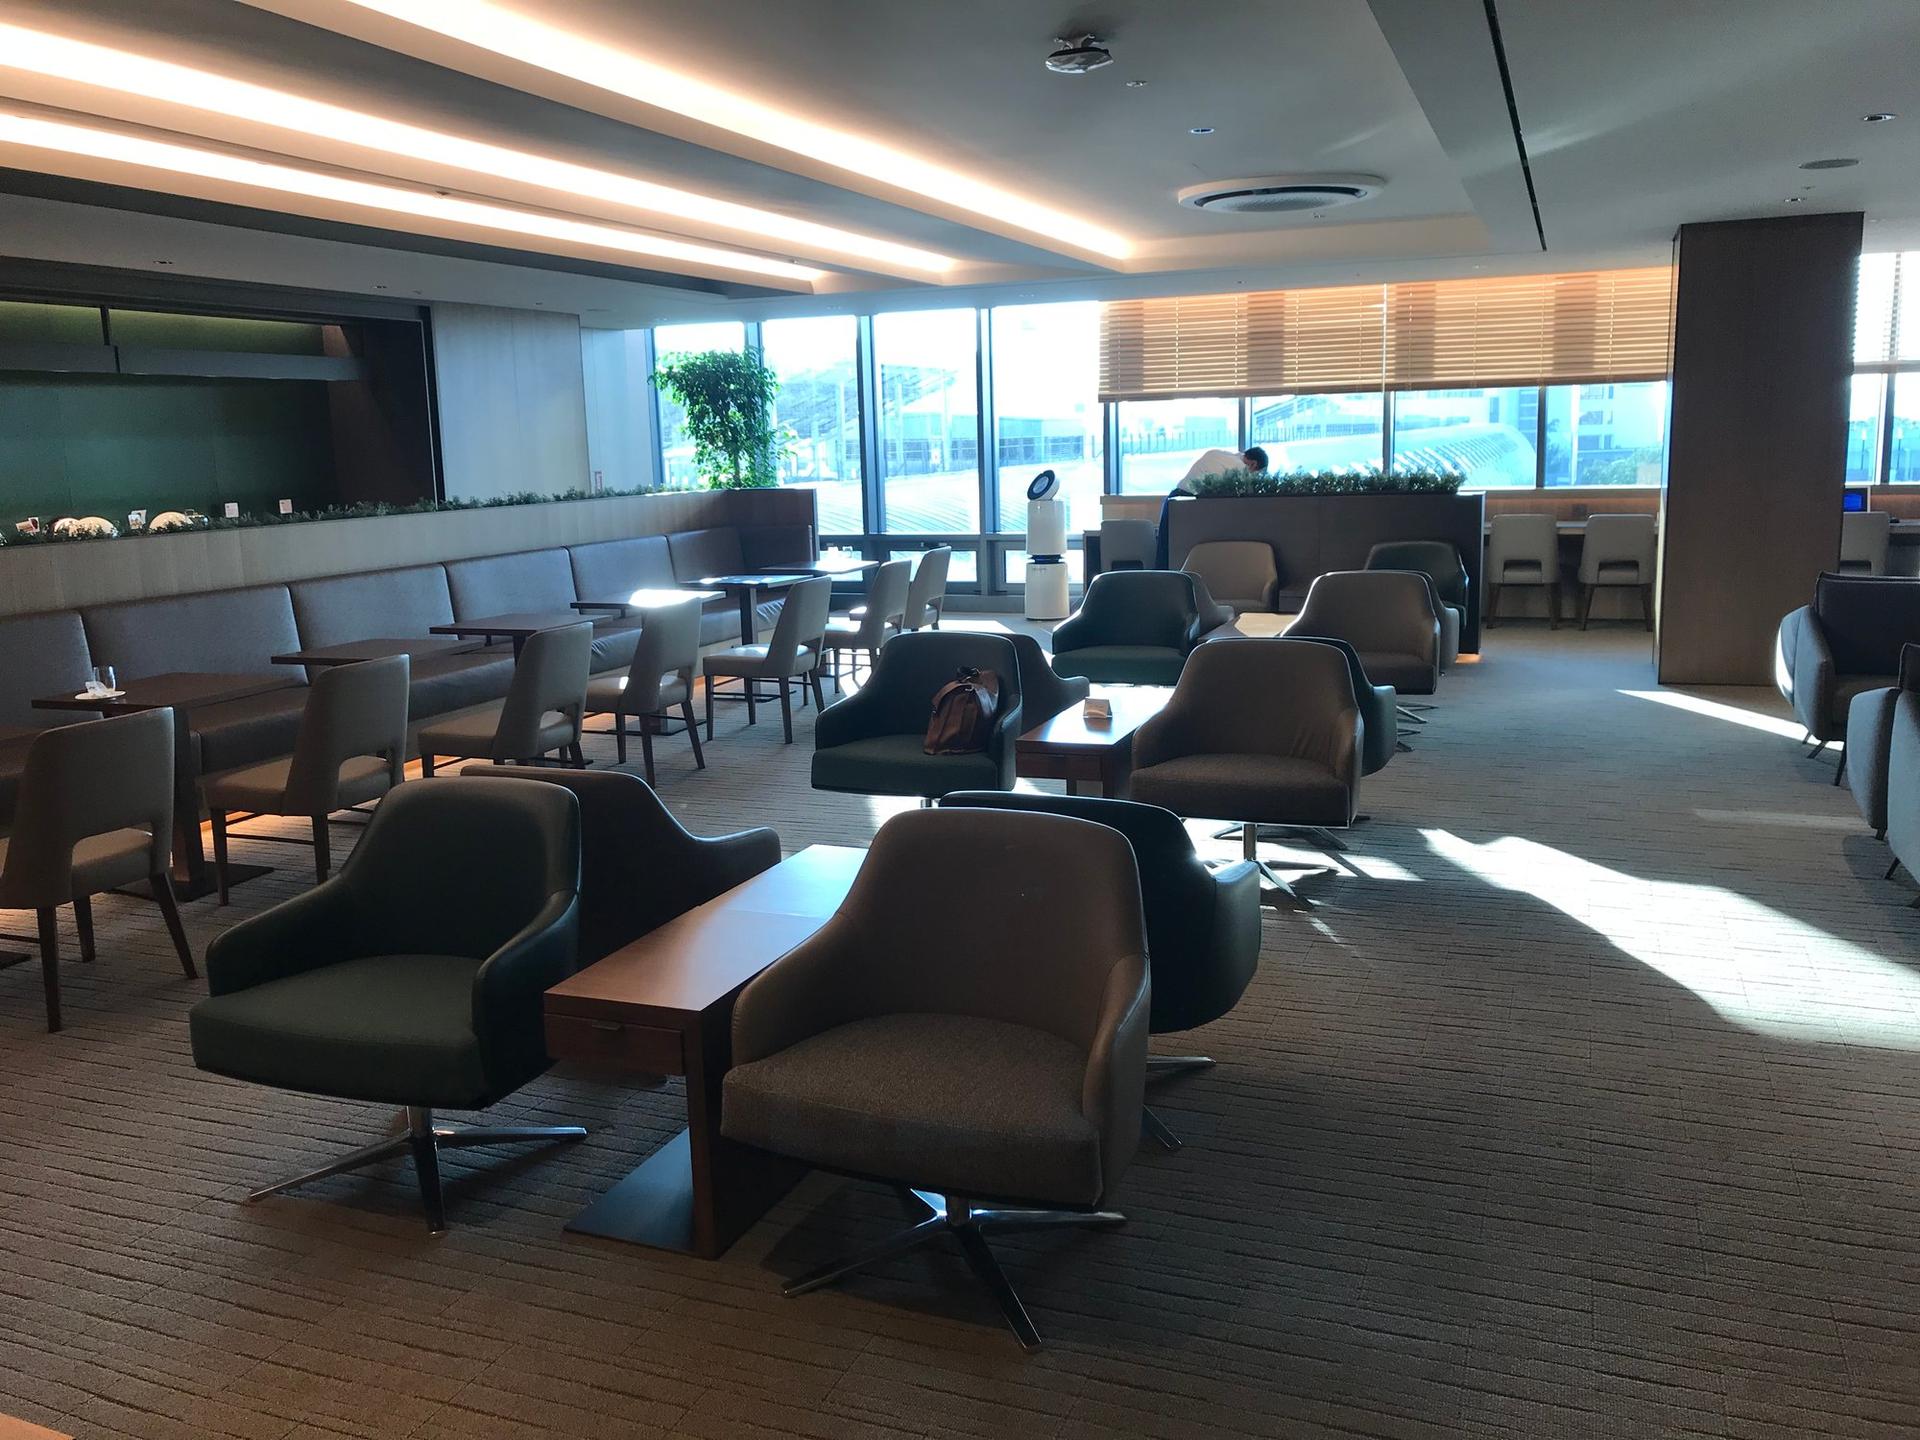 Asiana Airlines Lounge image 13 of 24